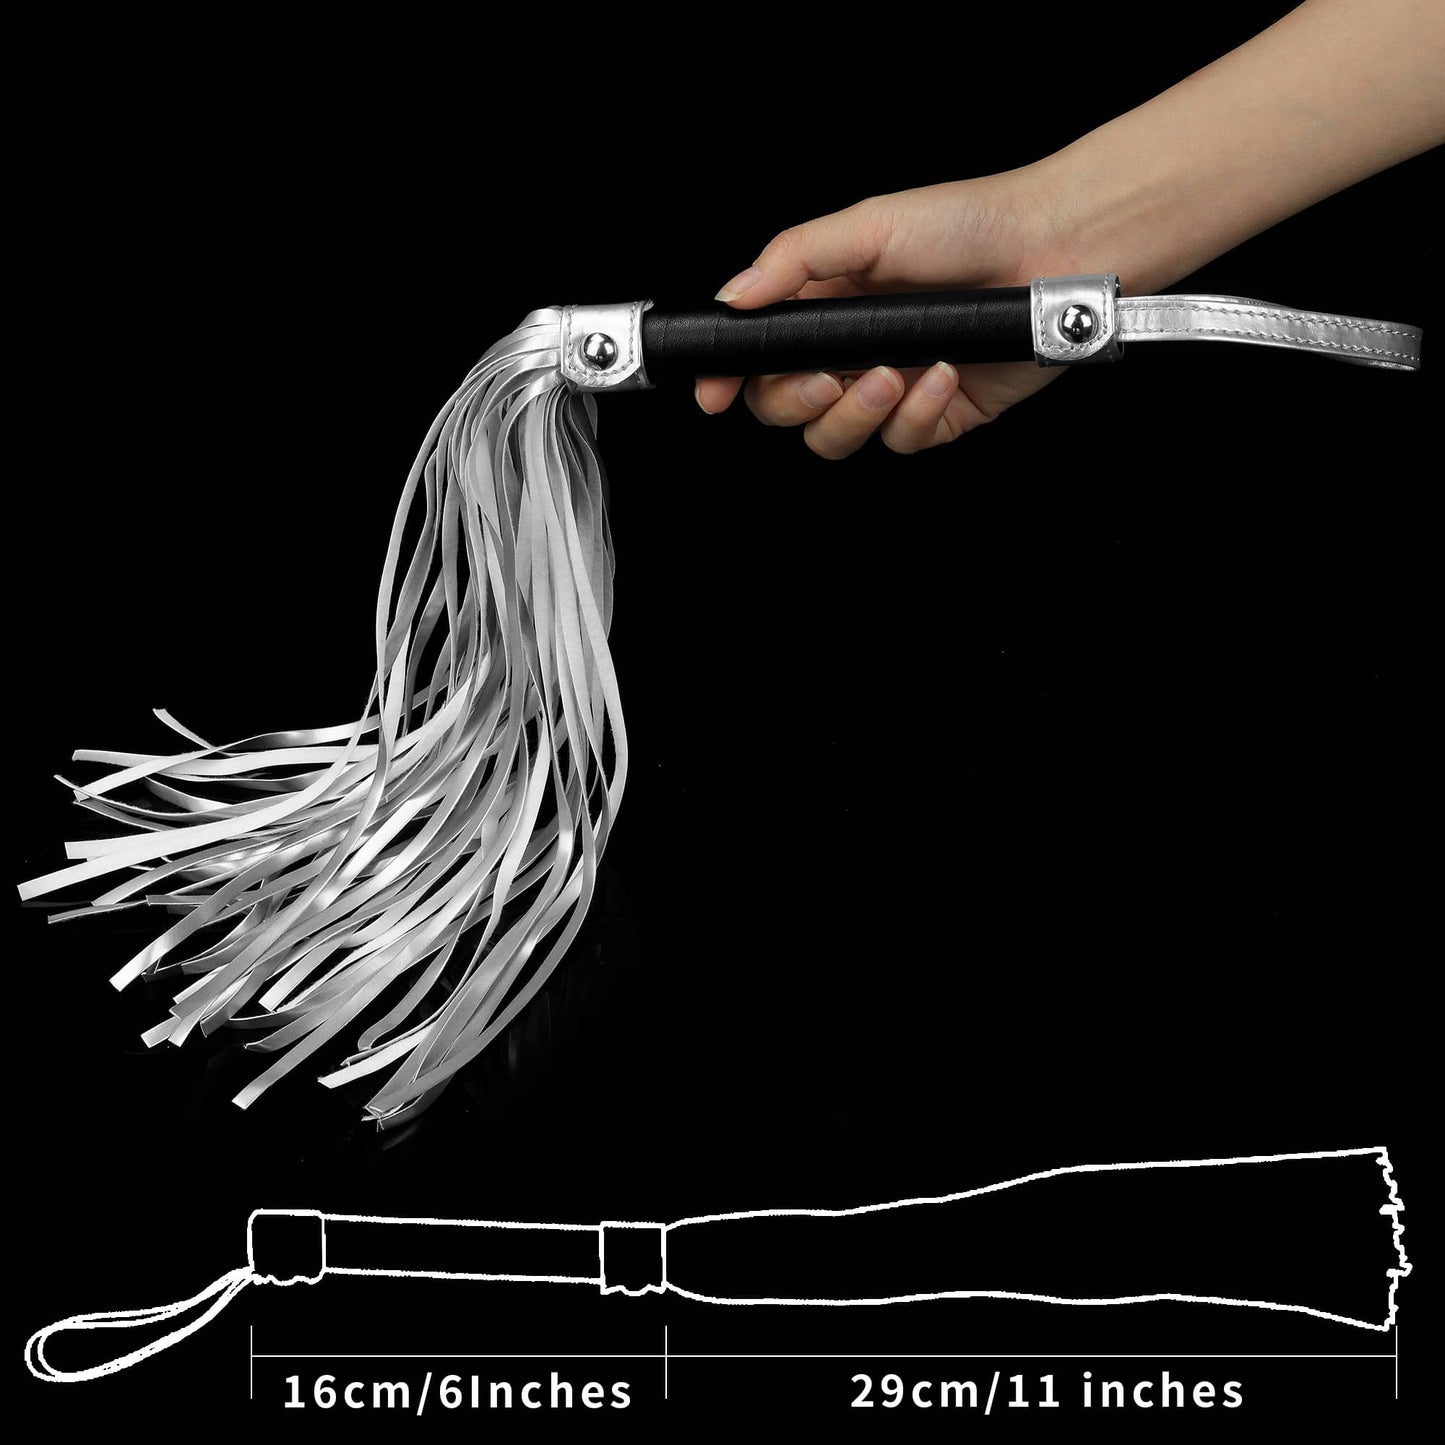 The size of the bdsm sex whip flogger for kinky play